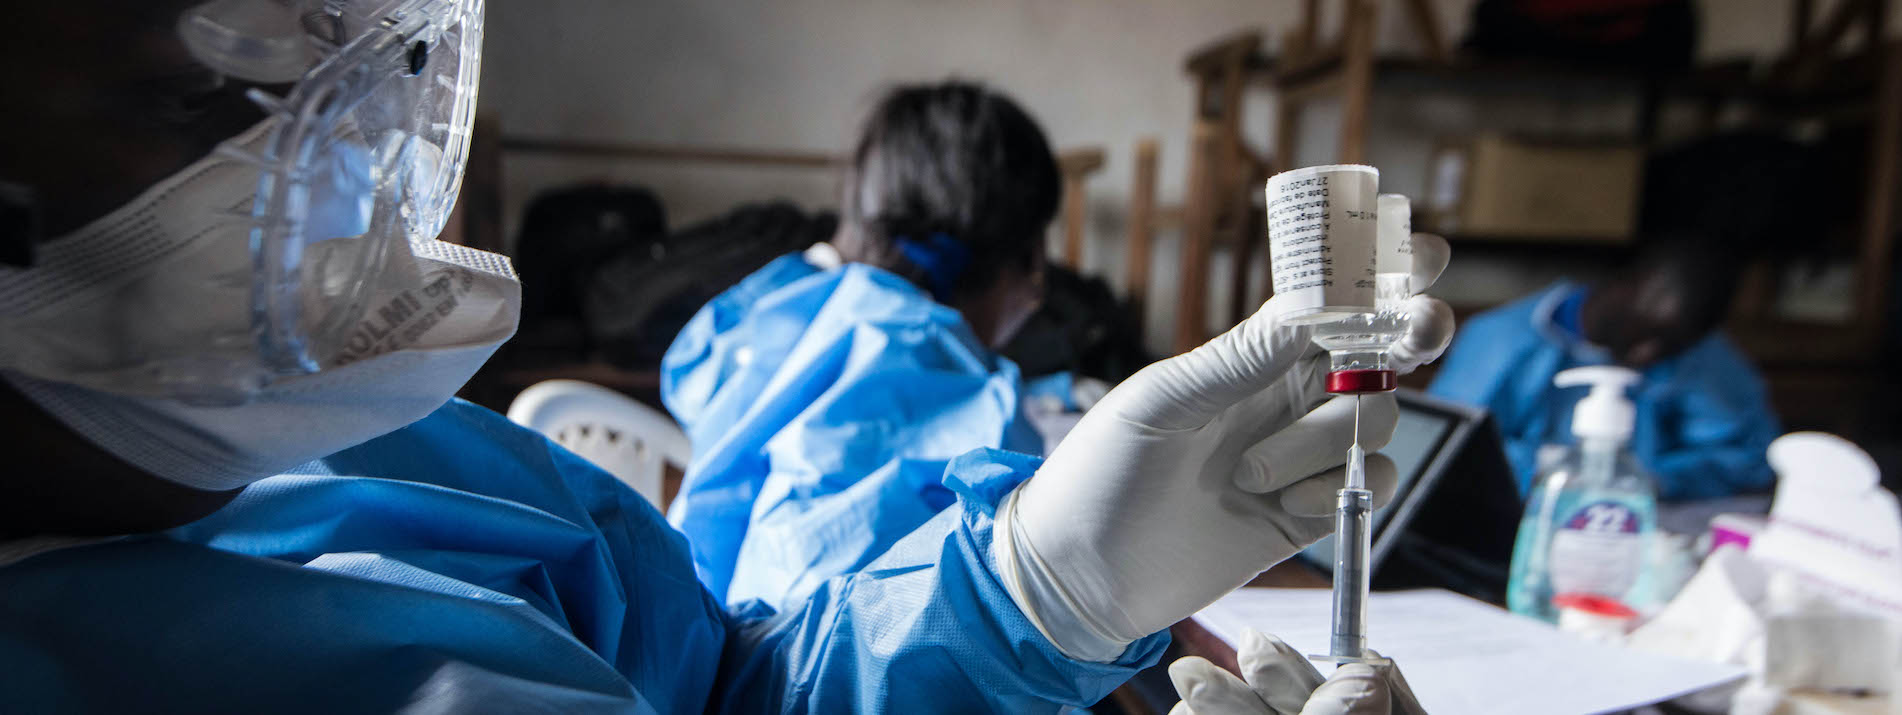 Building on Ebola response to tackle COVID-19 in DRC